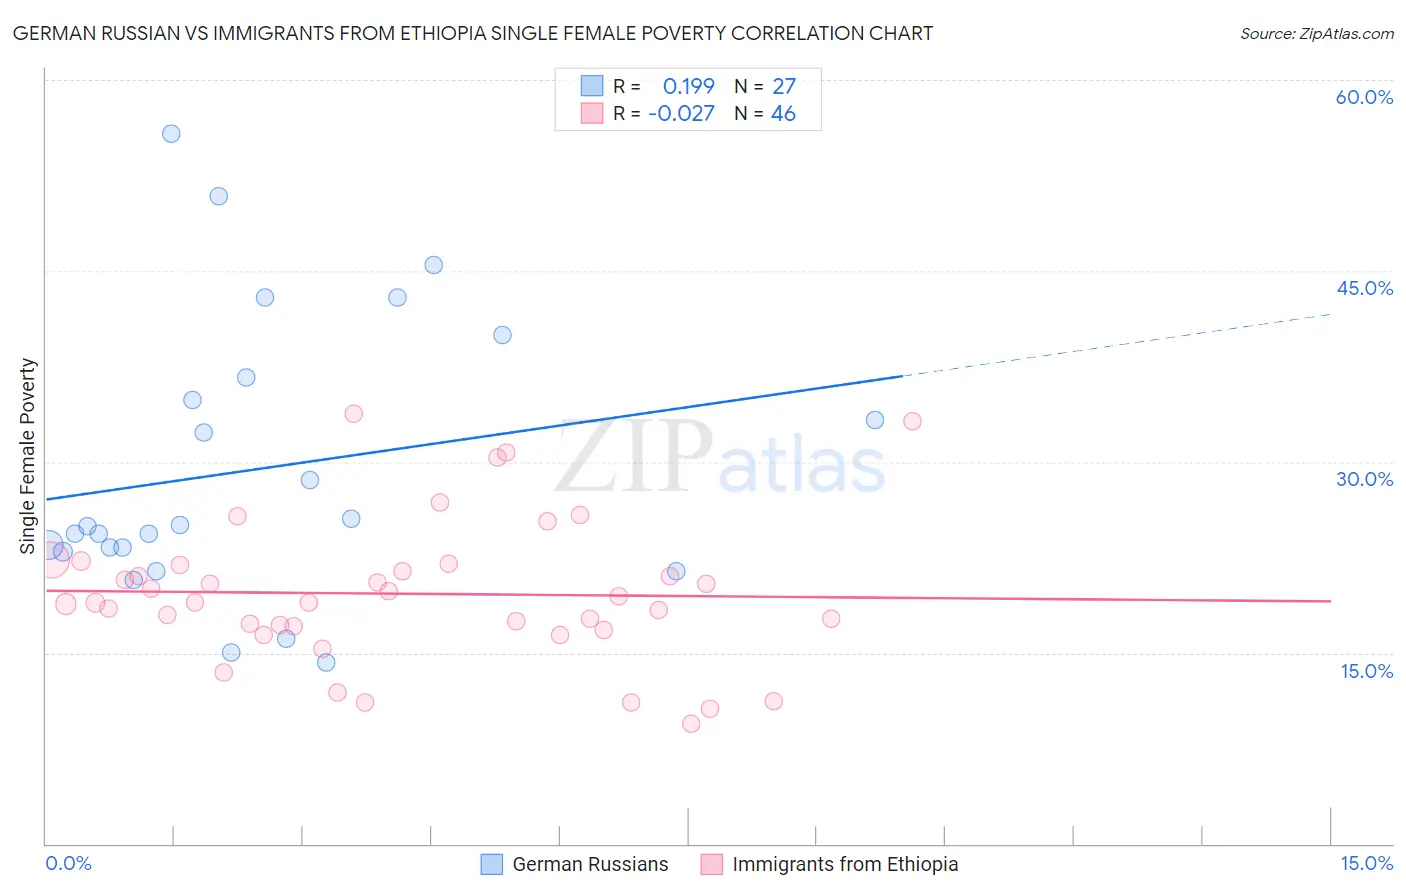 German Russian vs Immigrants from Ethiopia Single Female Poverty